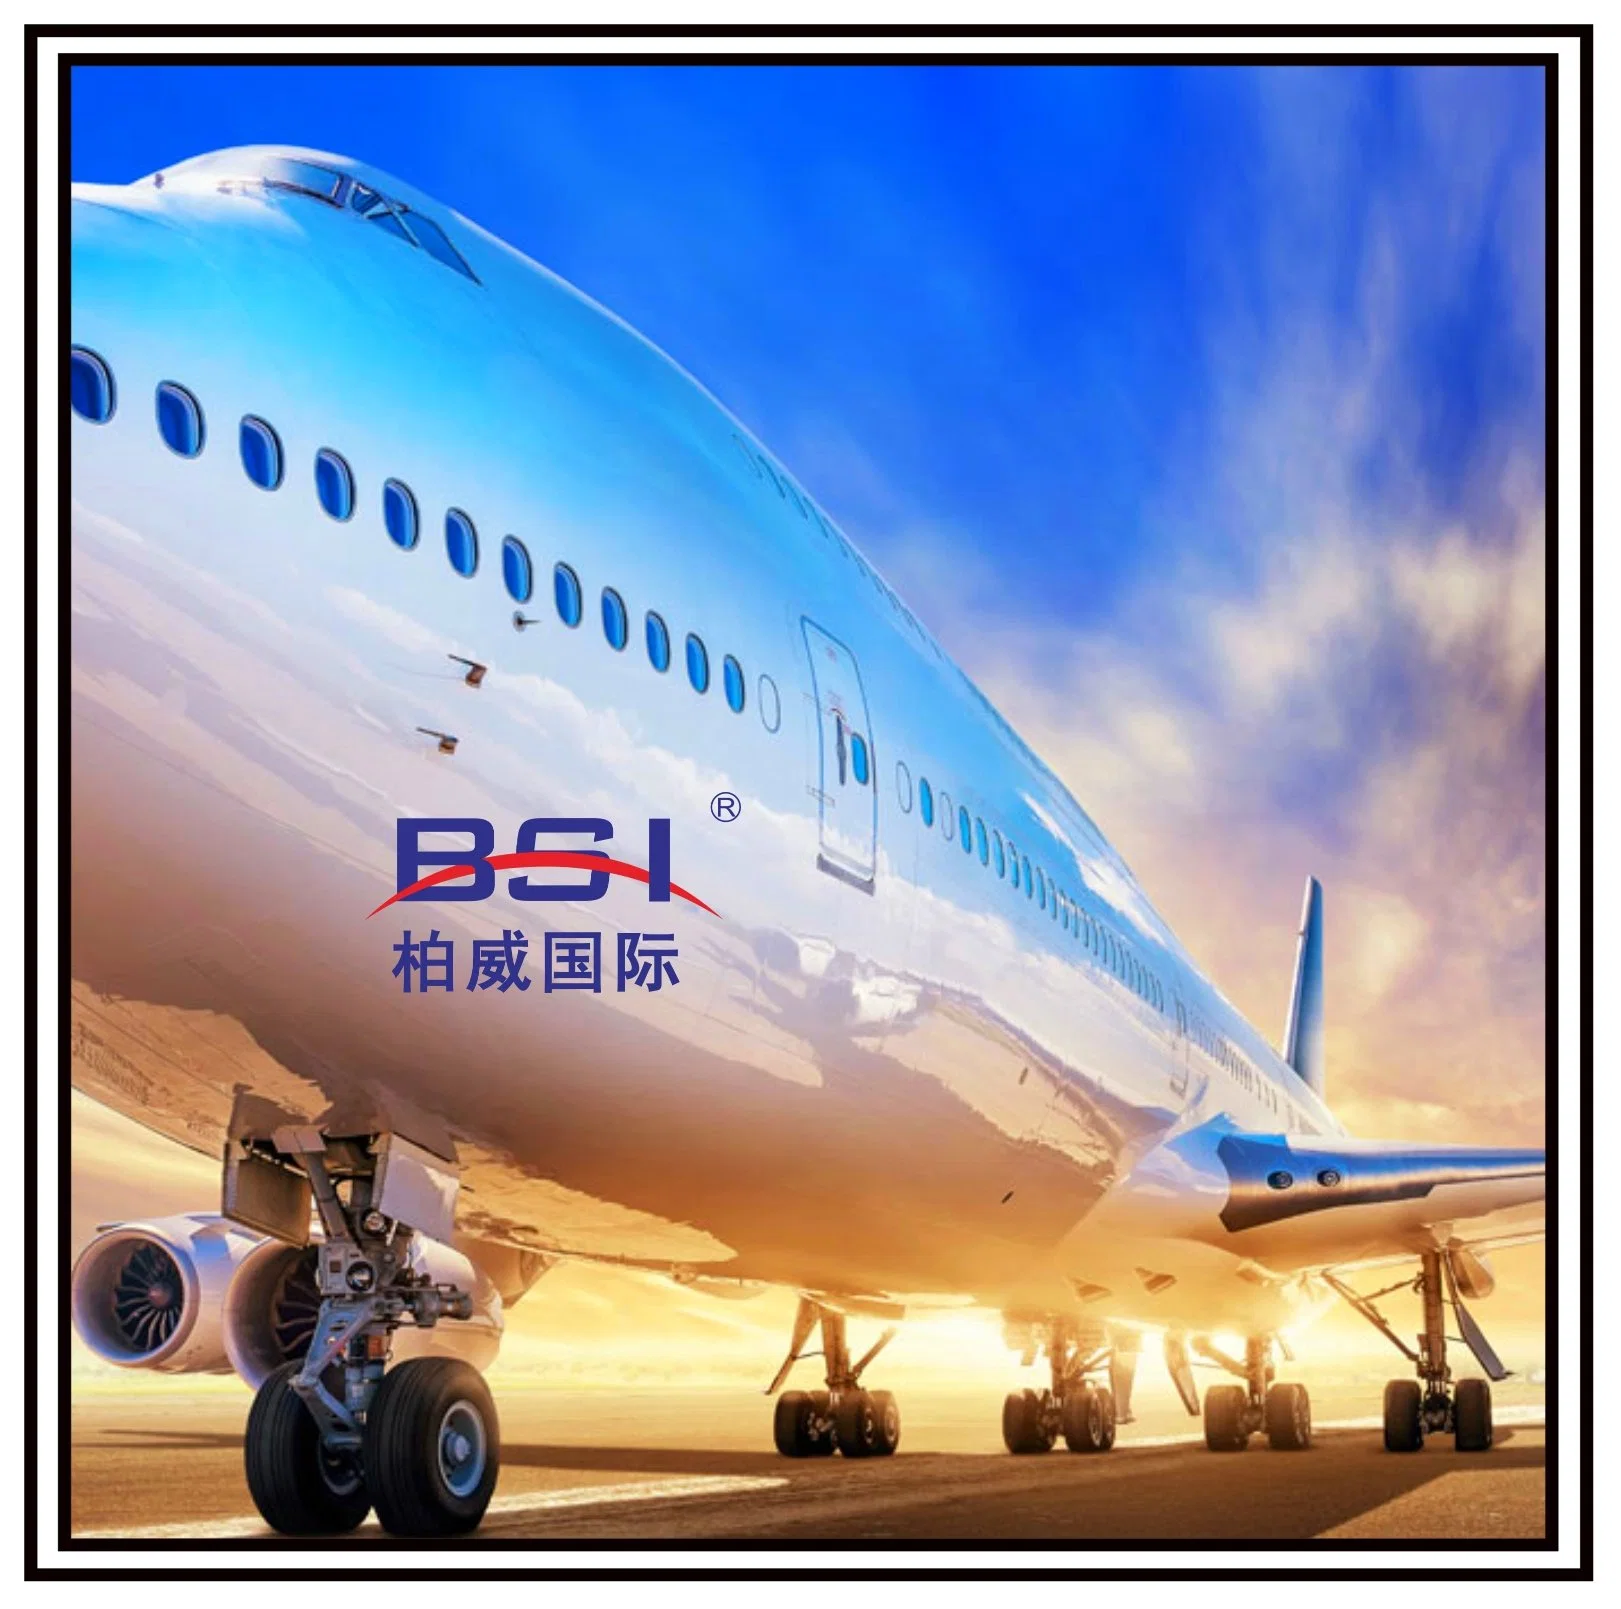 Professional Air Cargo Transportation Logistics Services From Shenzhen to Sweden for Over 20 Years